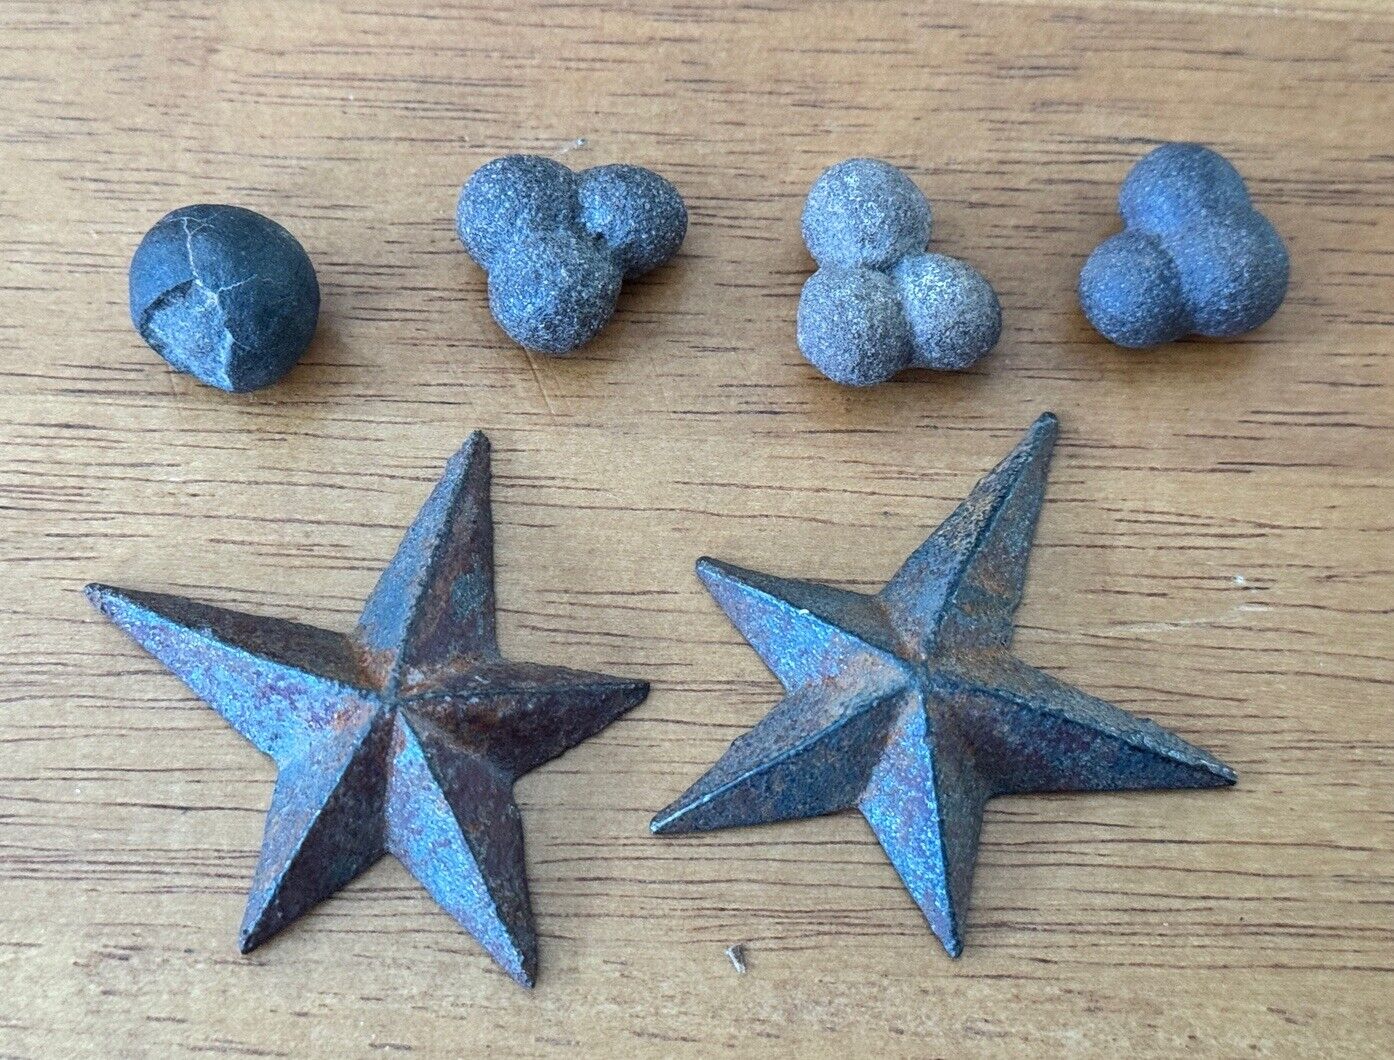 2 Antique Cast Iron Miniature Stars and Unusual Natural Stones or Rocks